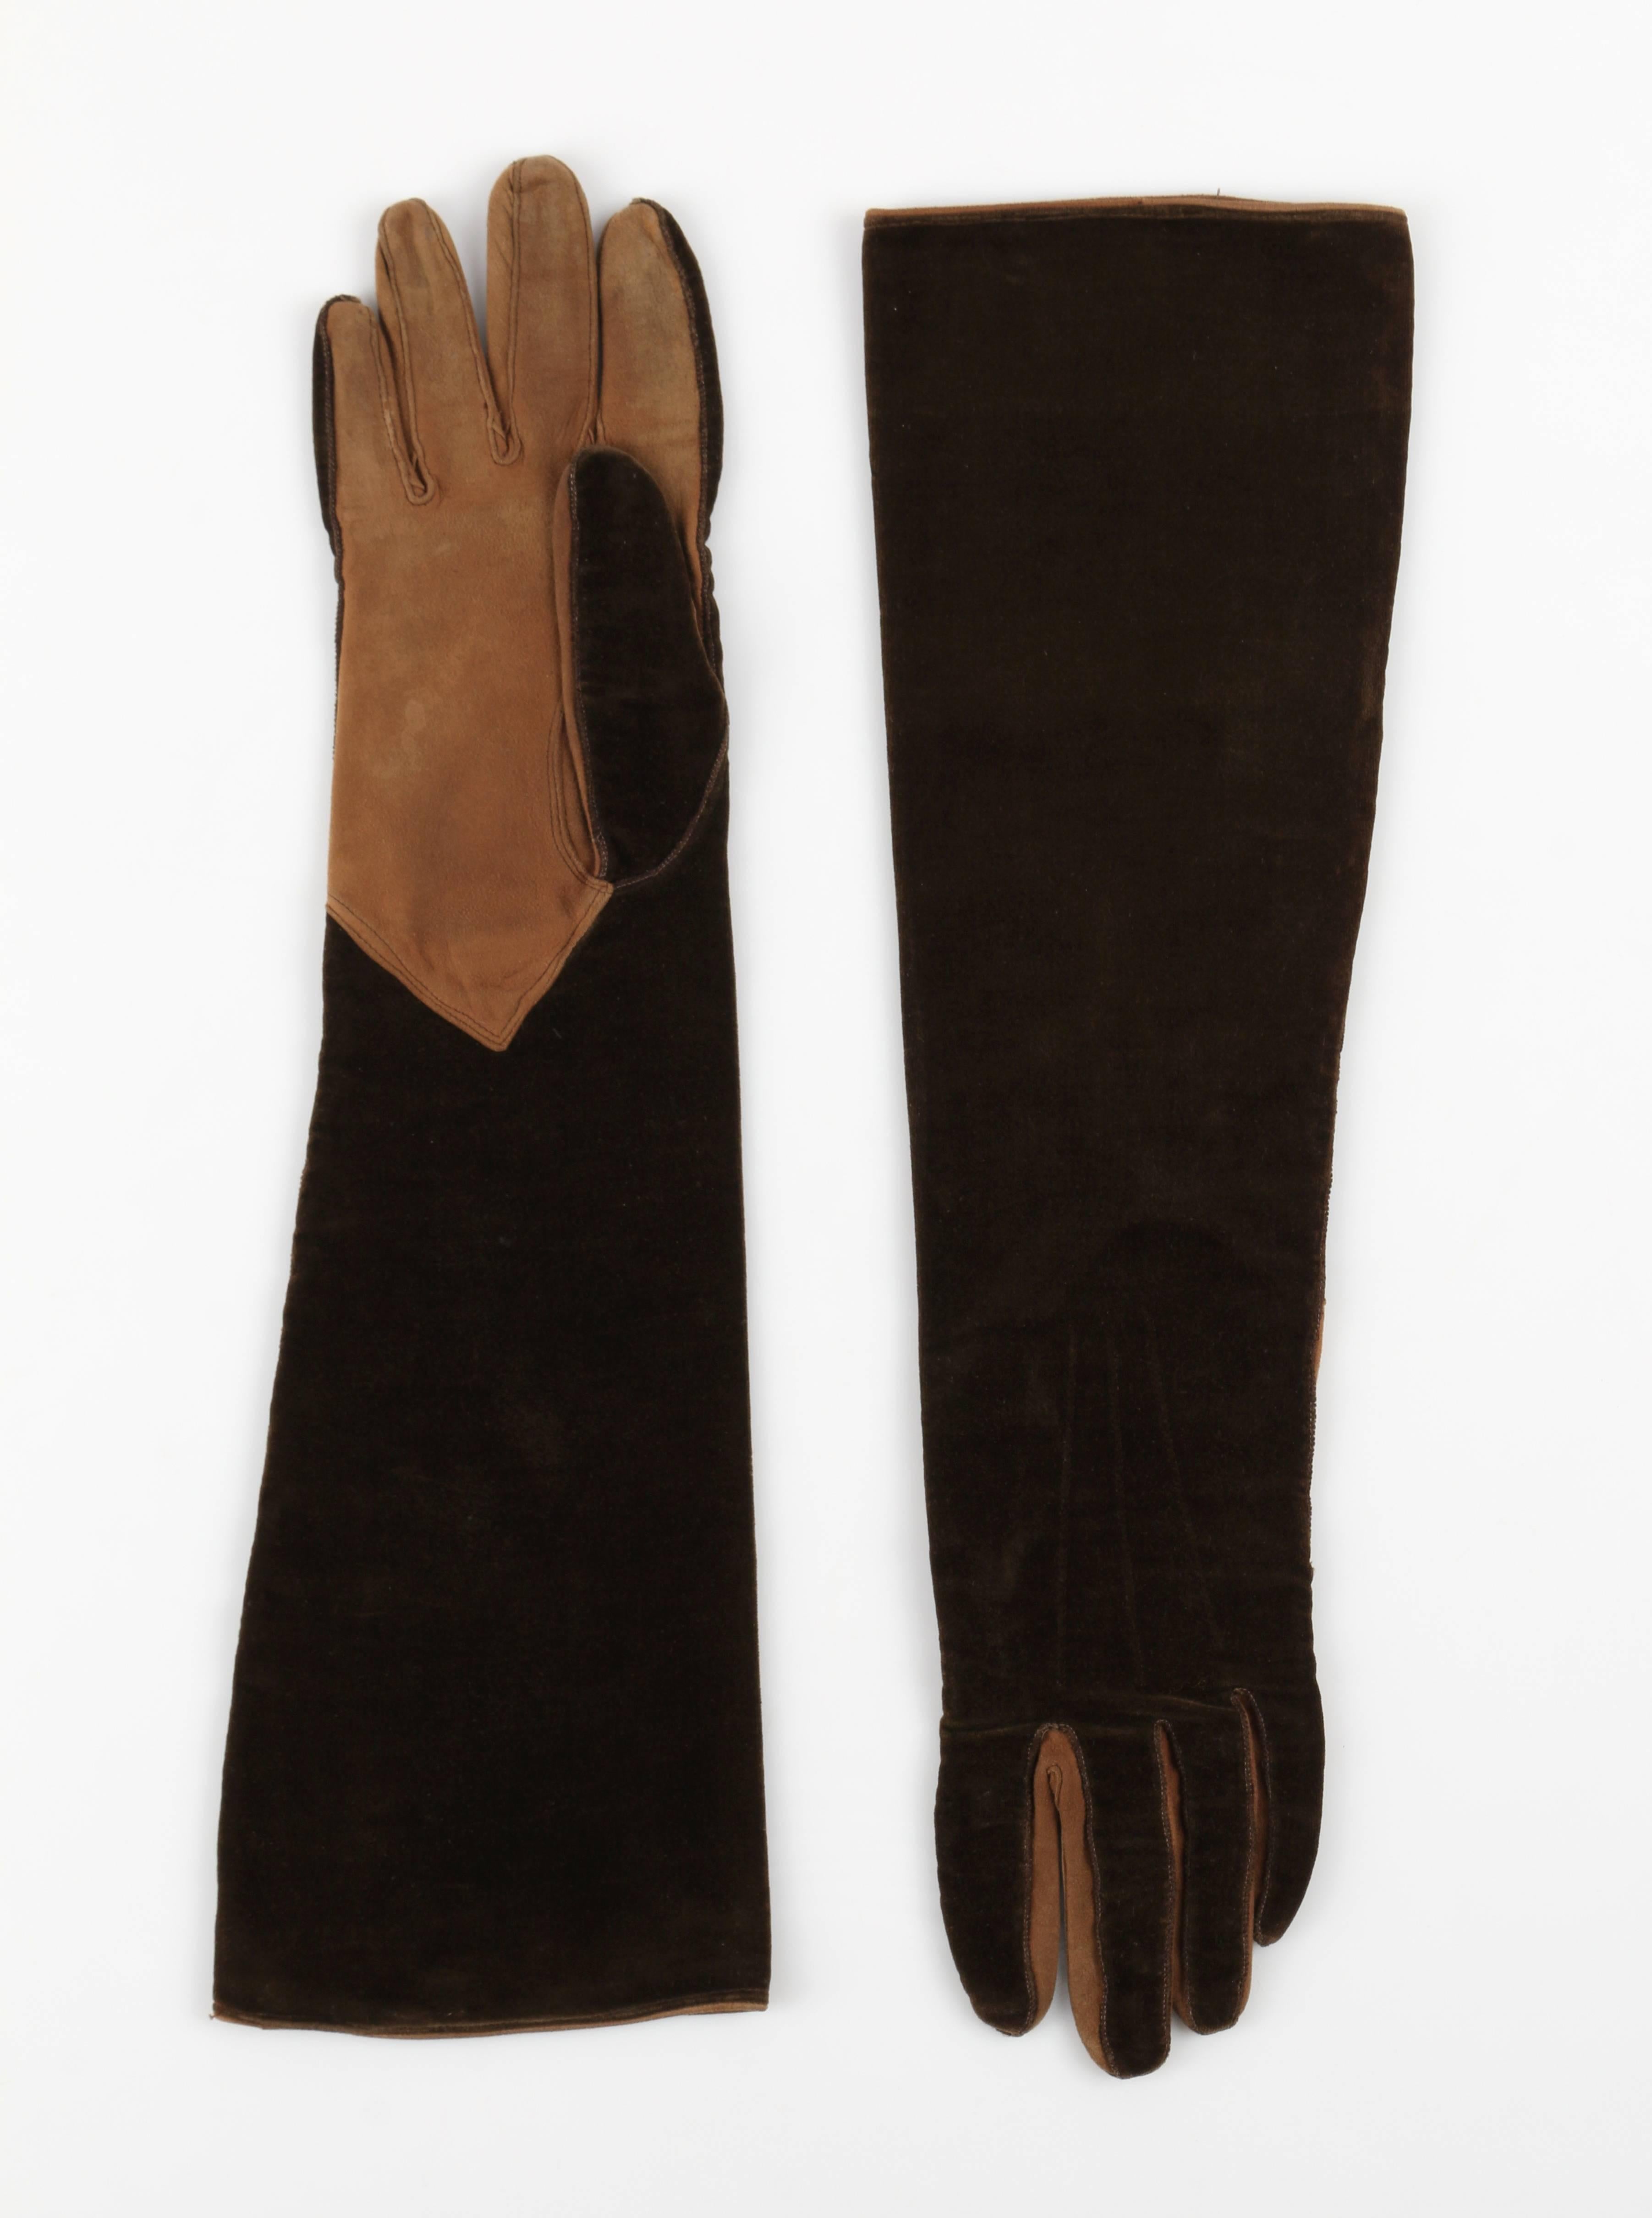 MUSEUM QUALITY: Vintage c.1930s Chanel brown velvet and suede leather gloves. Suede leather at palm and fingers. 3 pin tucks along top. Elbow length. Unmarked Fabric Content: Velvet and genuine leather suede. Marked Size: Marked size of